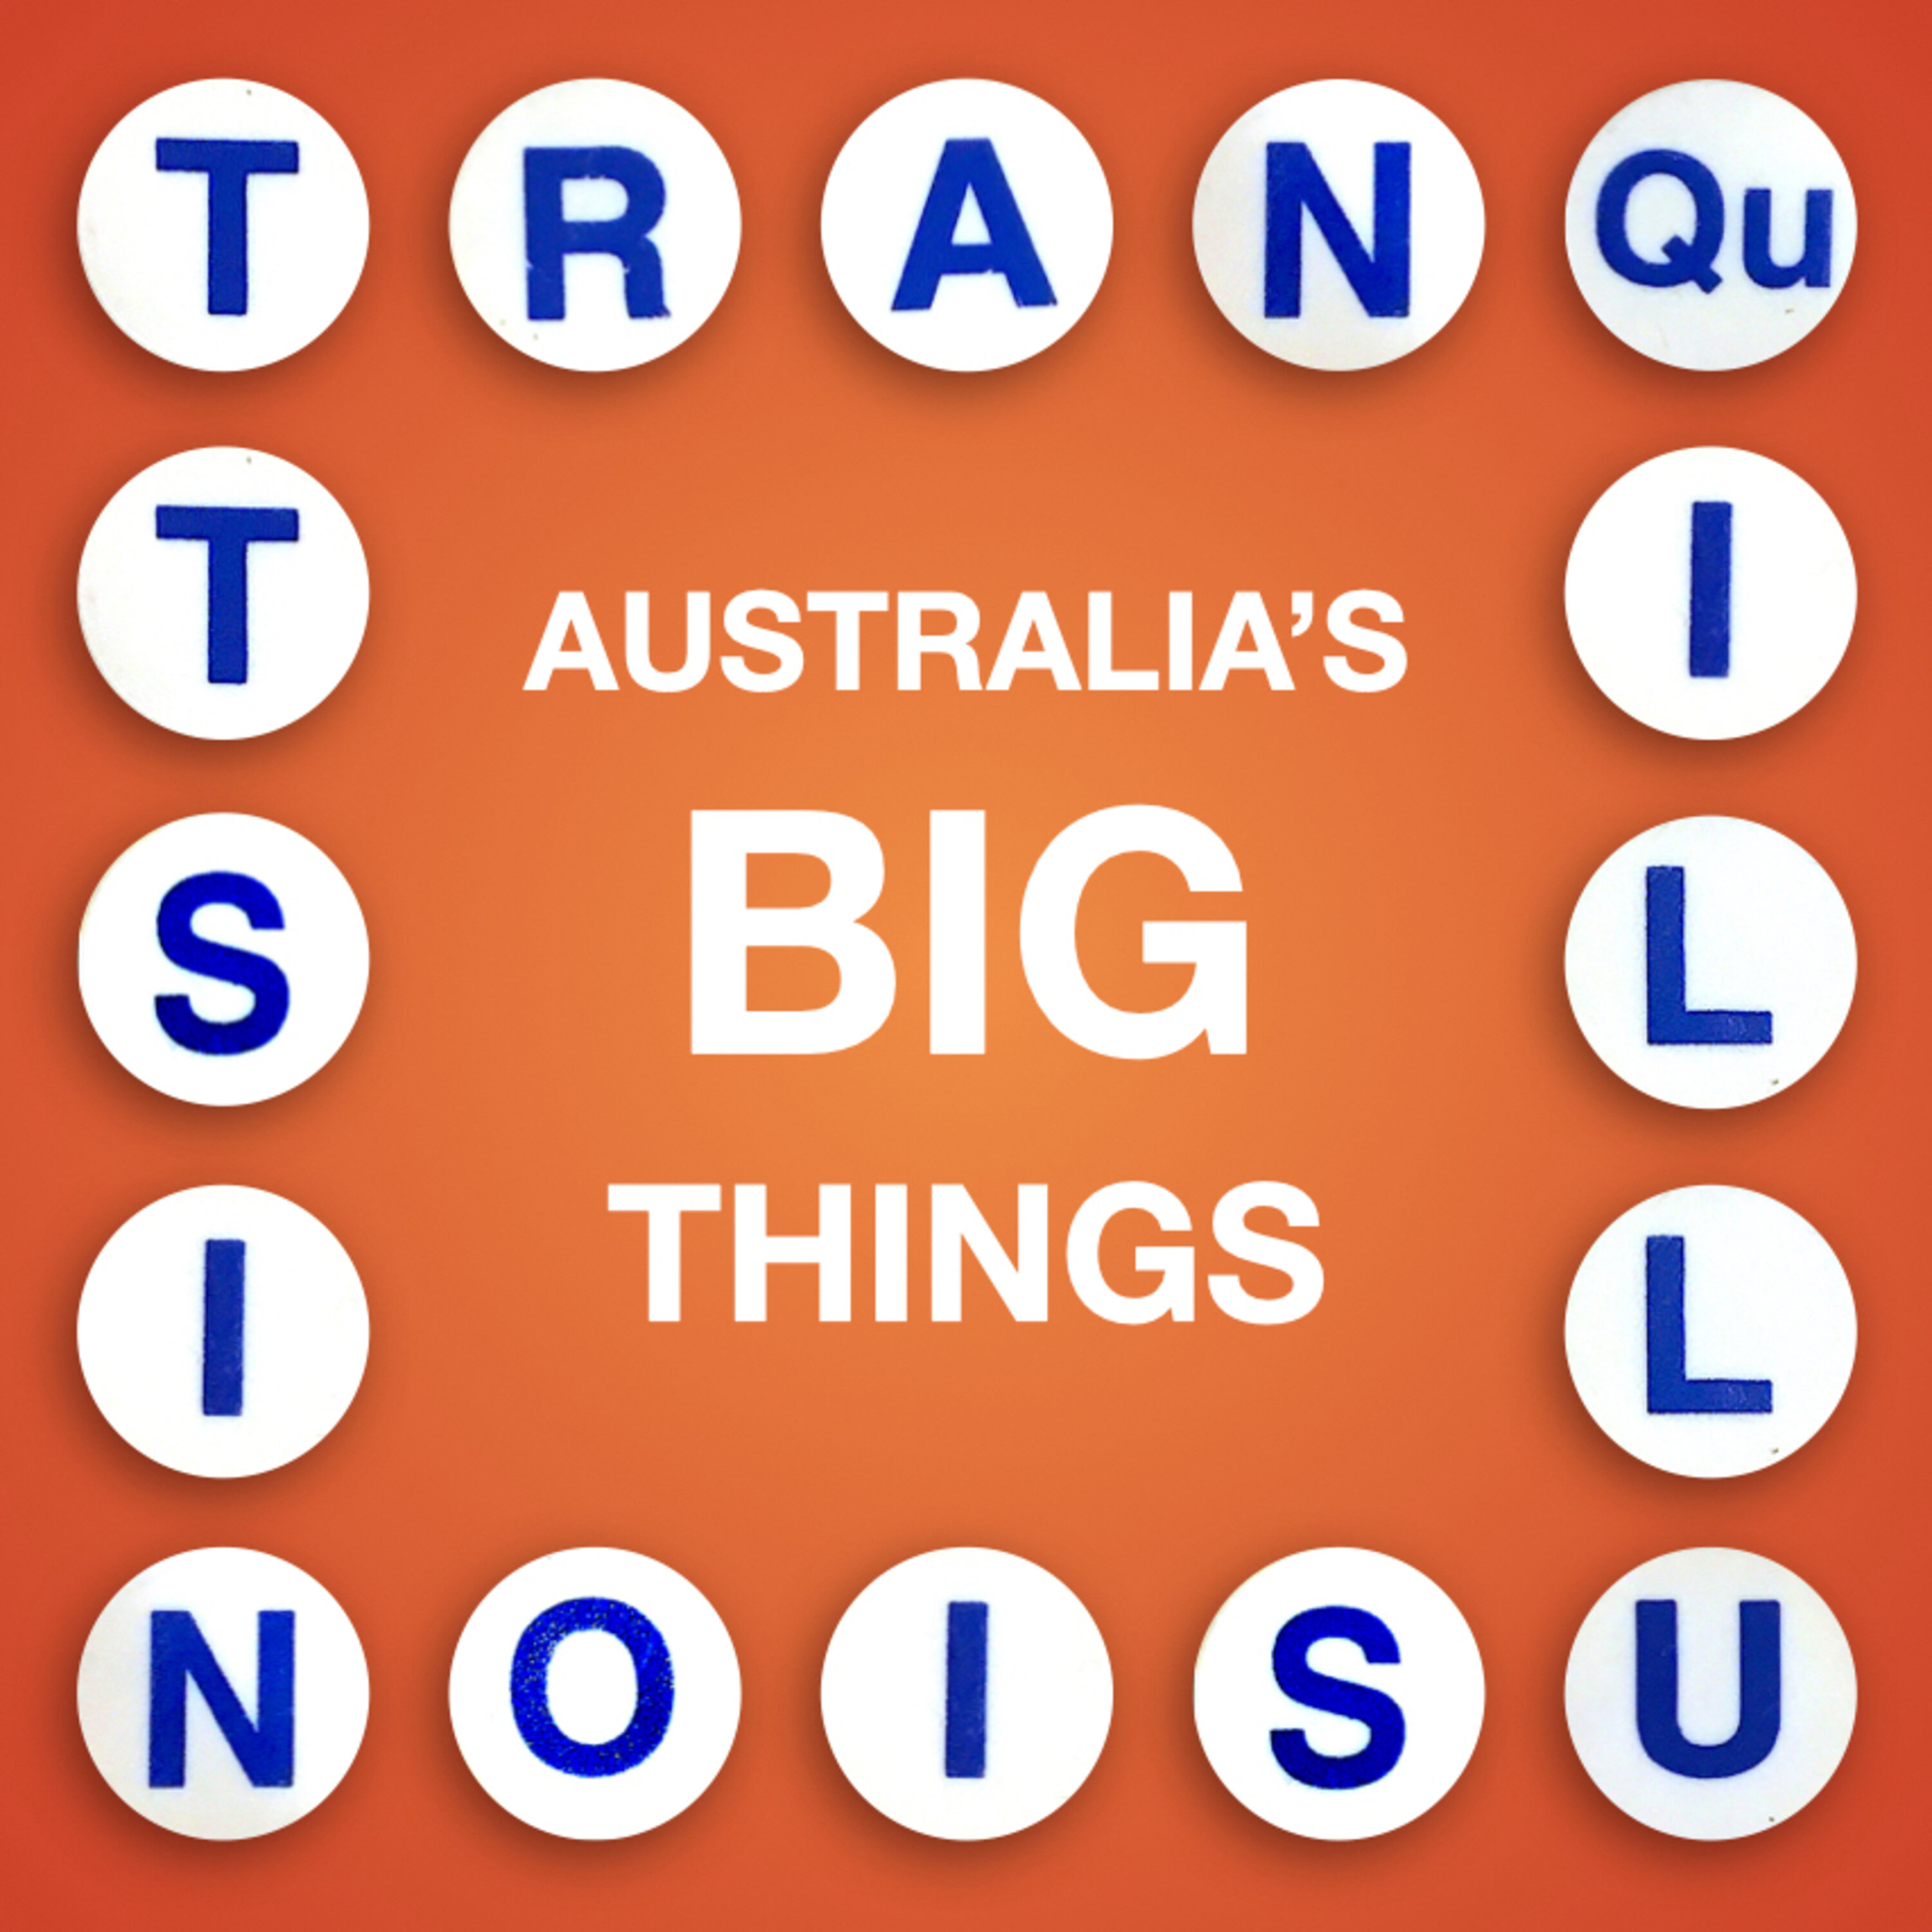 Thumbnail for "Tranquillusionist: Australia's Big Things".